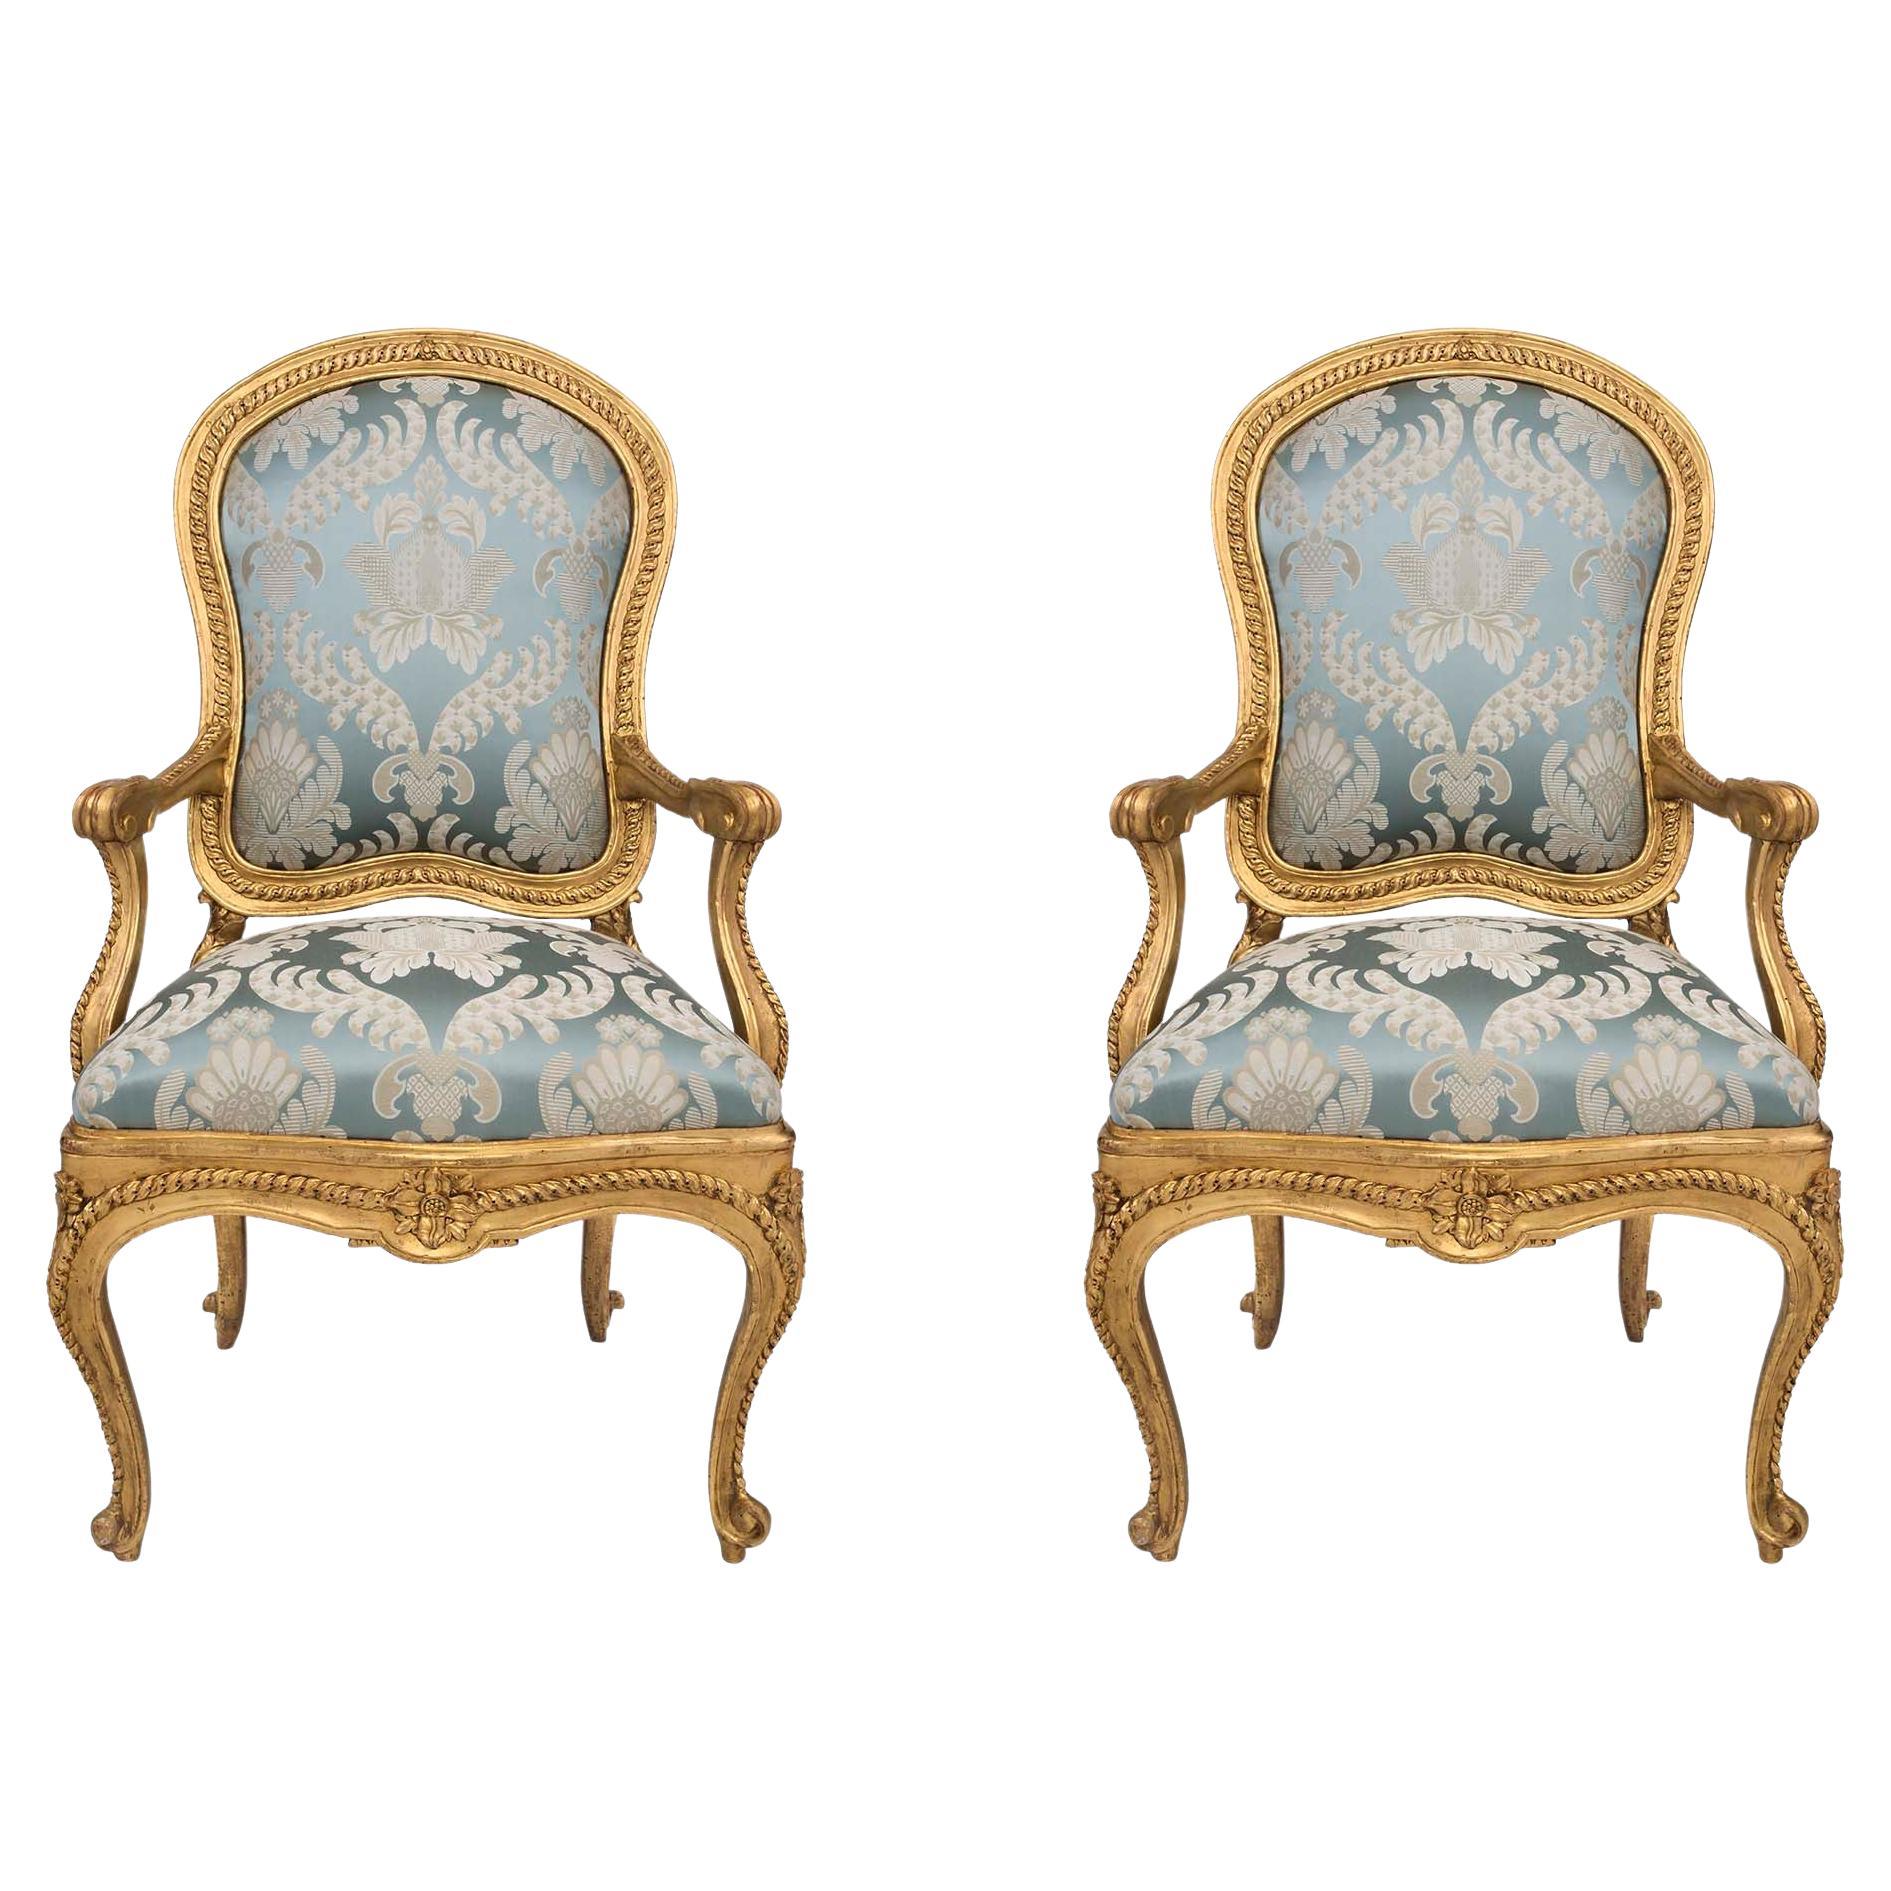 Pair of Italian 18th Century Louis XV Style Throne Giltwood Armchairs �À Chassis